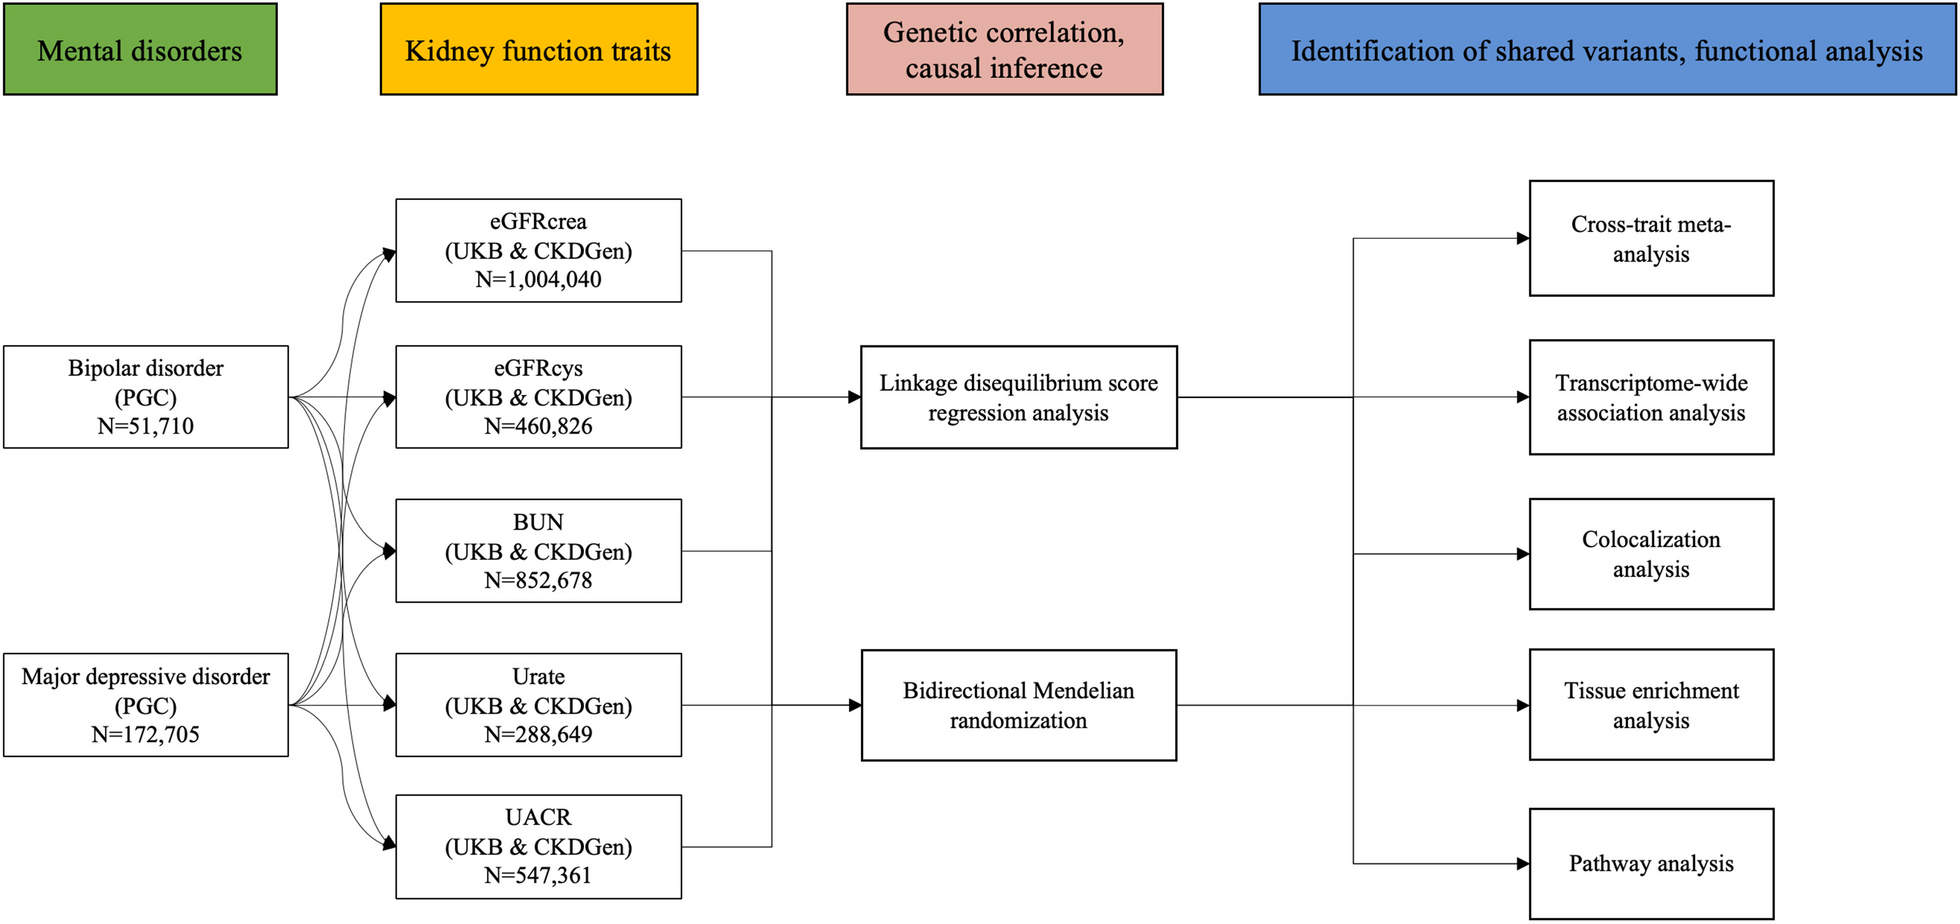 Shared genetic effect of kidney function on bipolar and major depressive disorders: a large-scale genome-wide cross-trait analysis